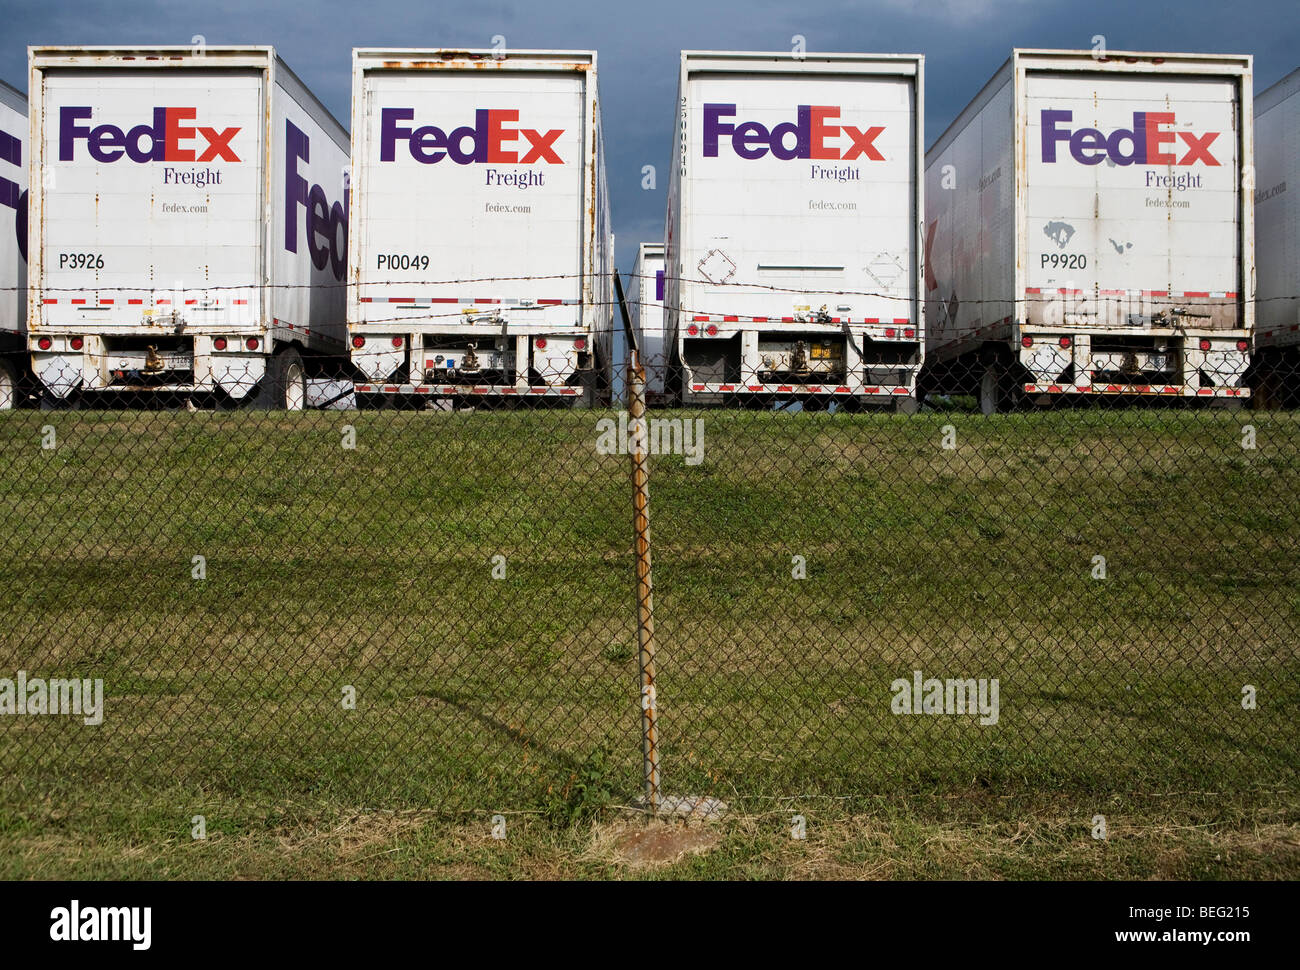 FedEx related images taken in Maryland.  Stock Photo